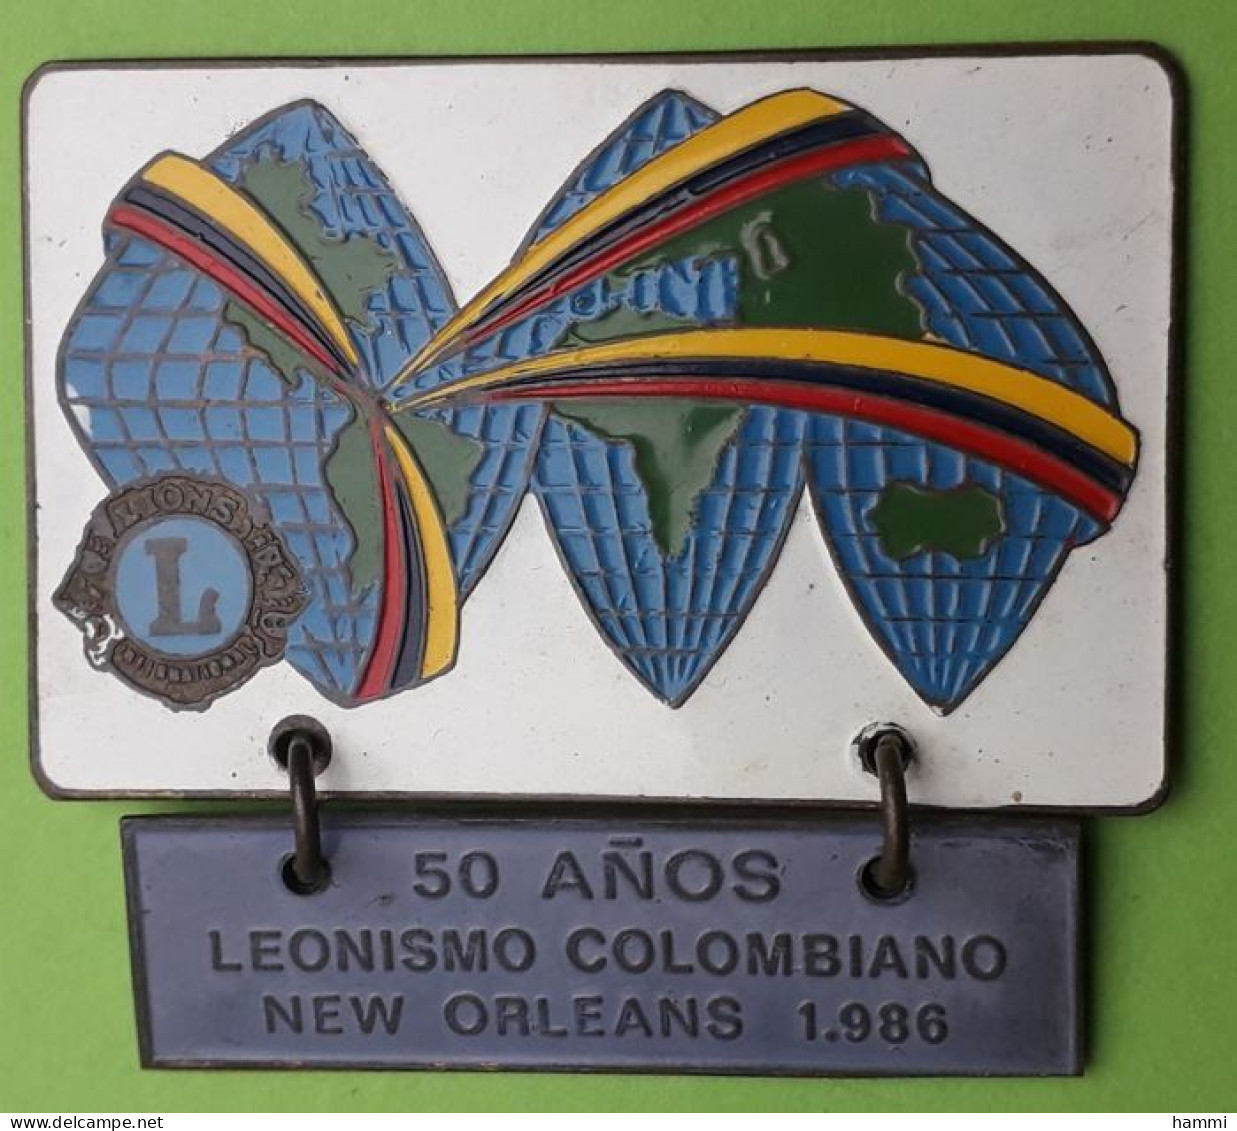 QQ605 Pin's Pendentif Lion's LIONS CLUB USA New Orleans 1986 Leonismo Colombiano Colombia 50 Ans 42x 40 Achat Fixe Fixe - Asociaciones